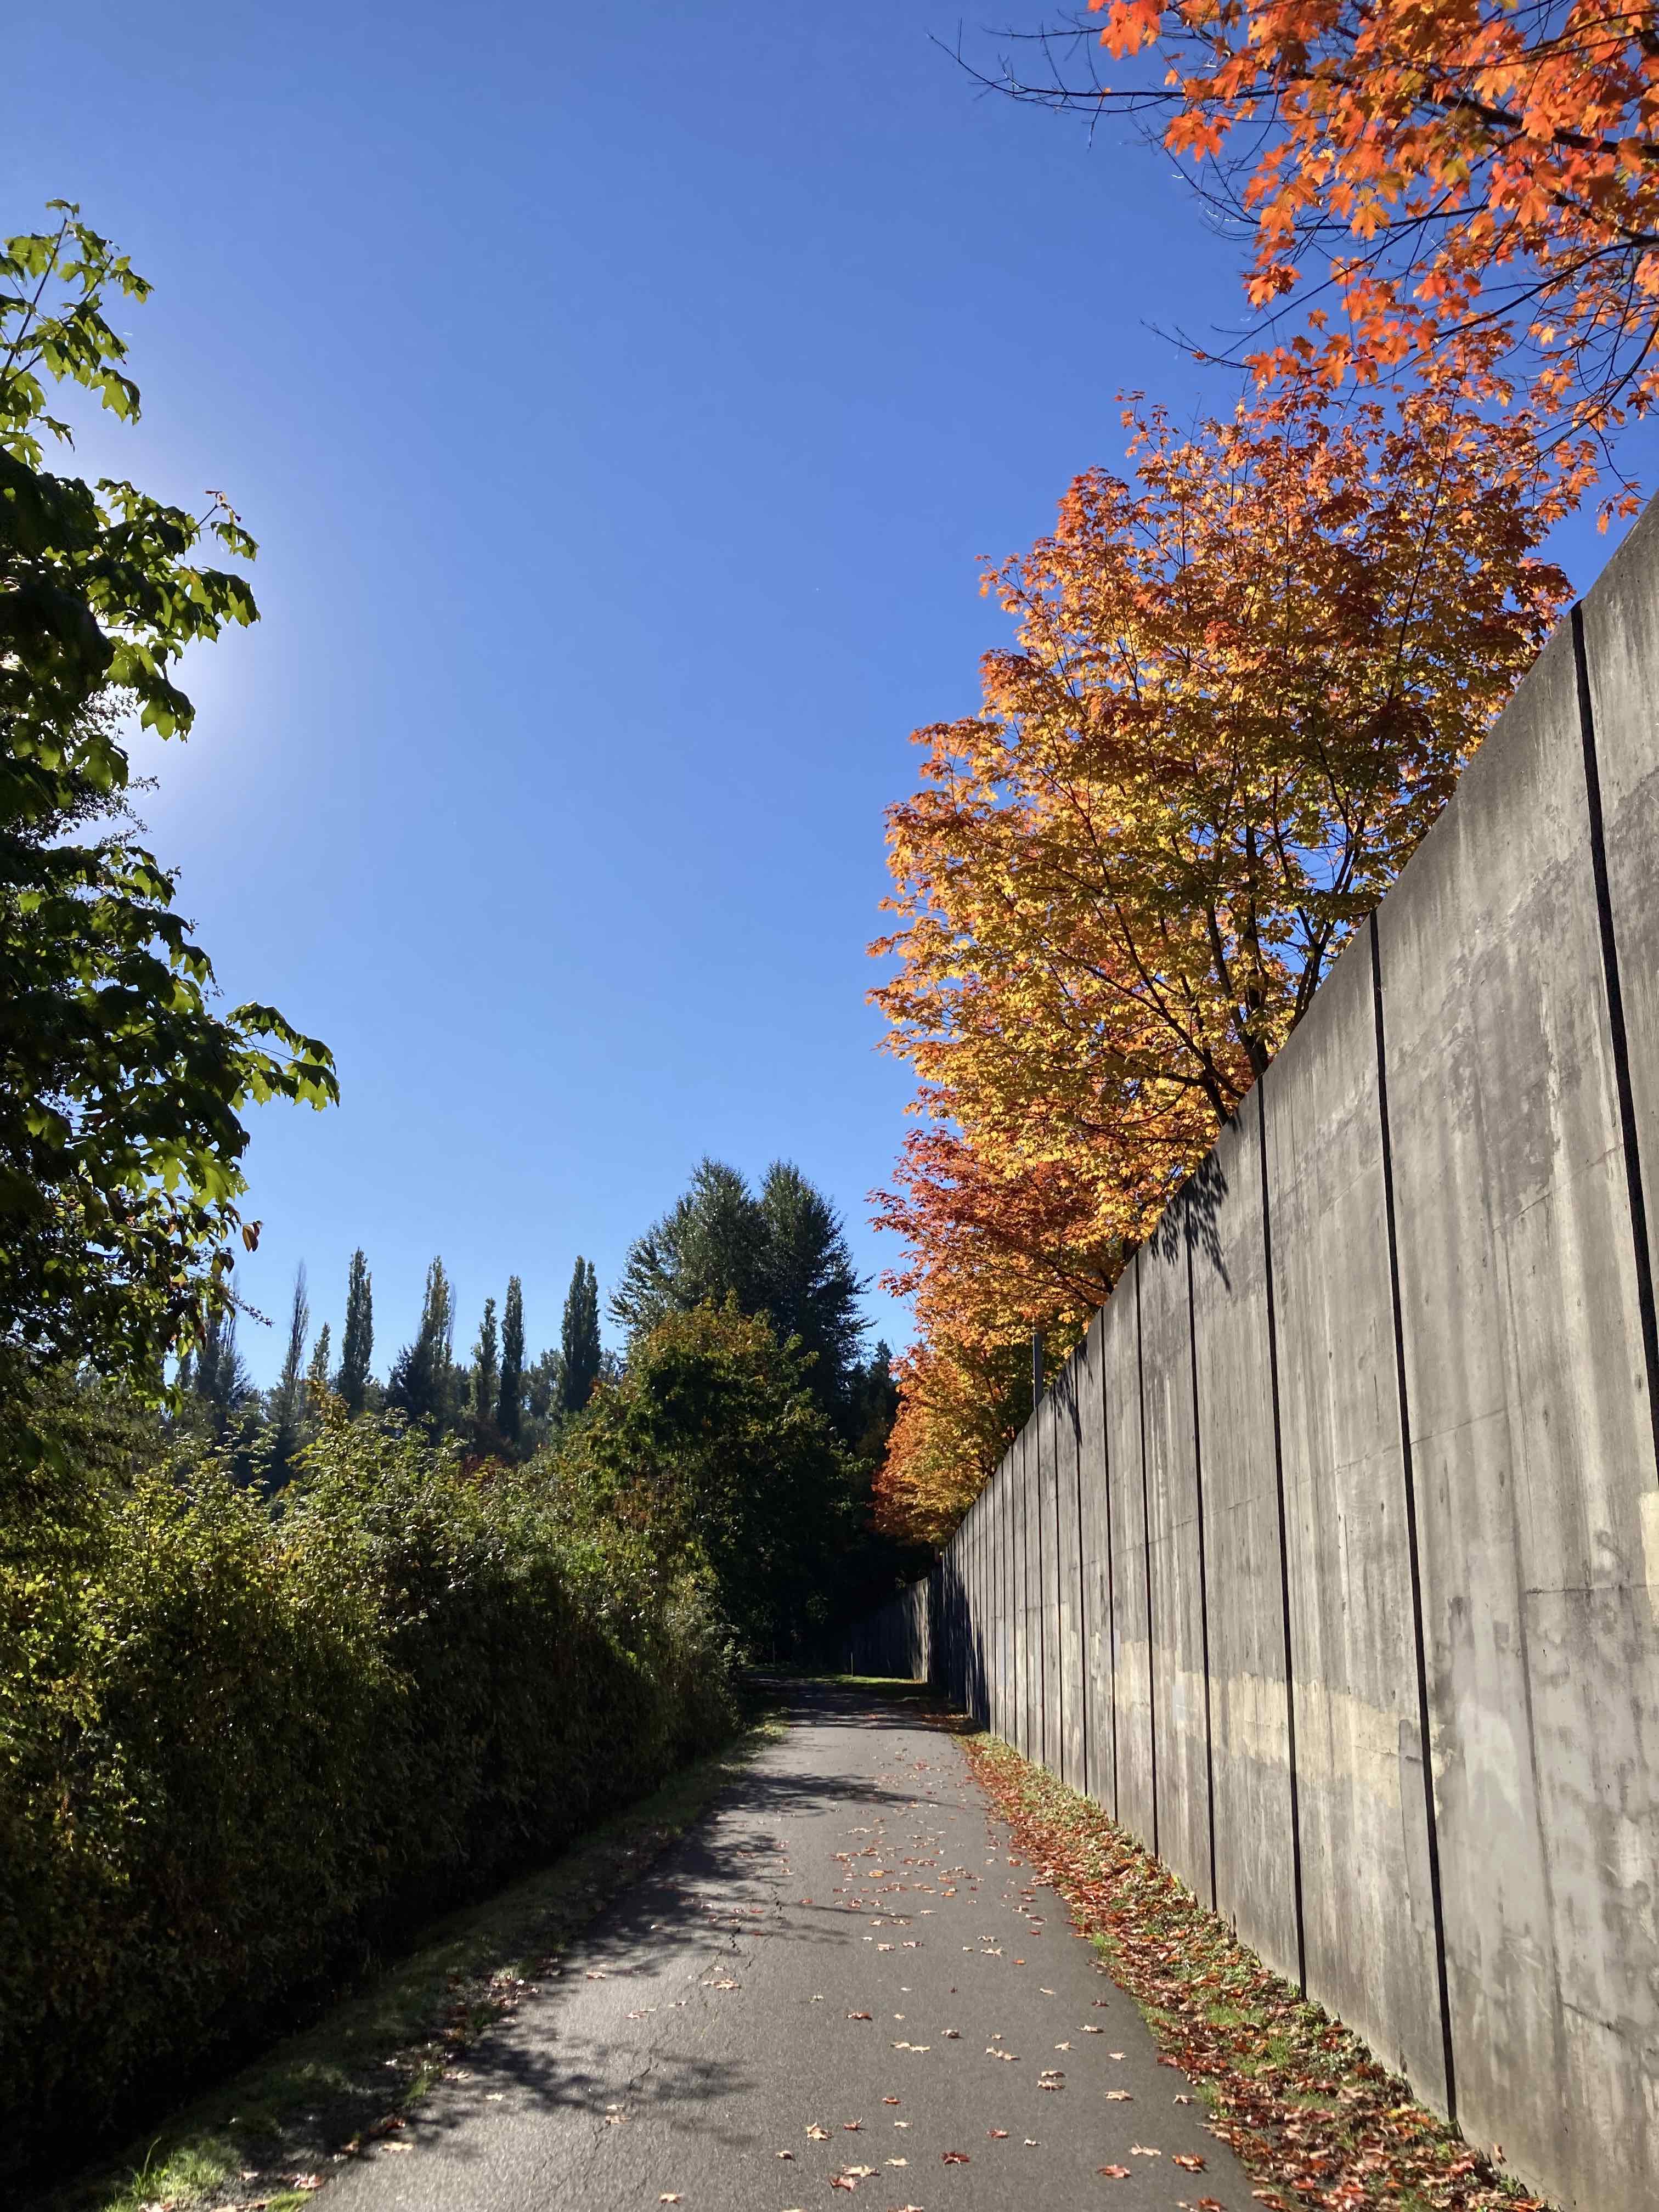 A pretty view of the trail with bright blue sky after the sun rose with green bushes (and the river out of sight) to the left, with the trail parallel to a high concrete wall of a road with cheery red and yellow leaved trees leaning over the trail.